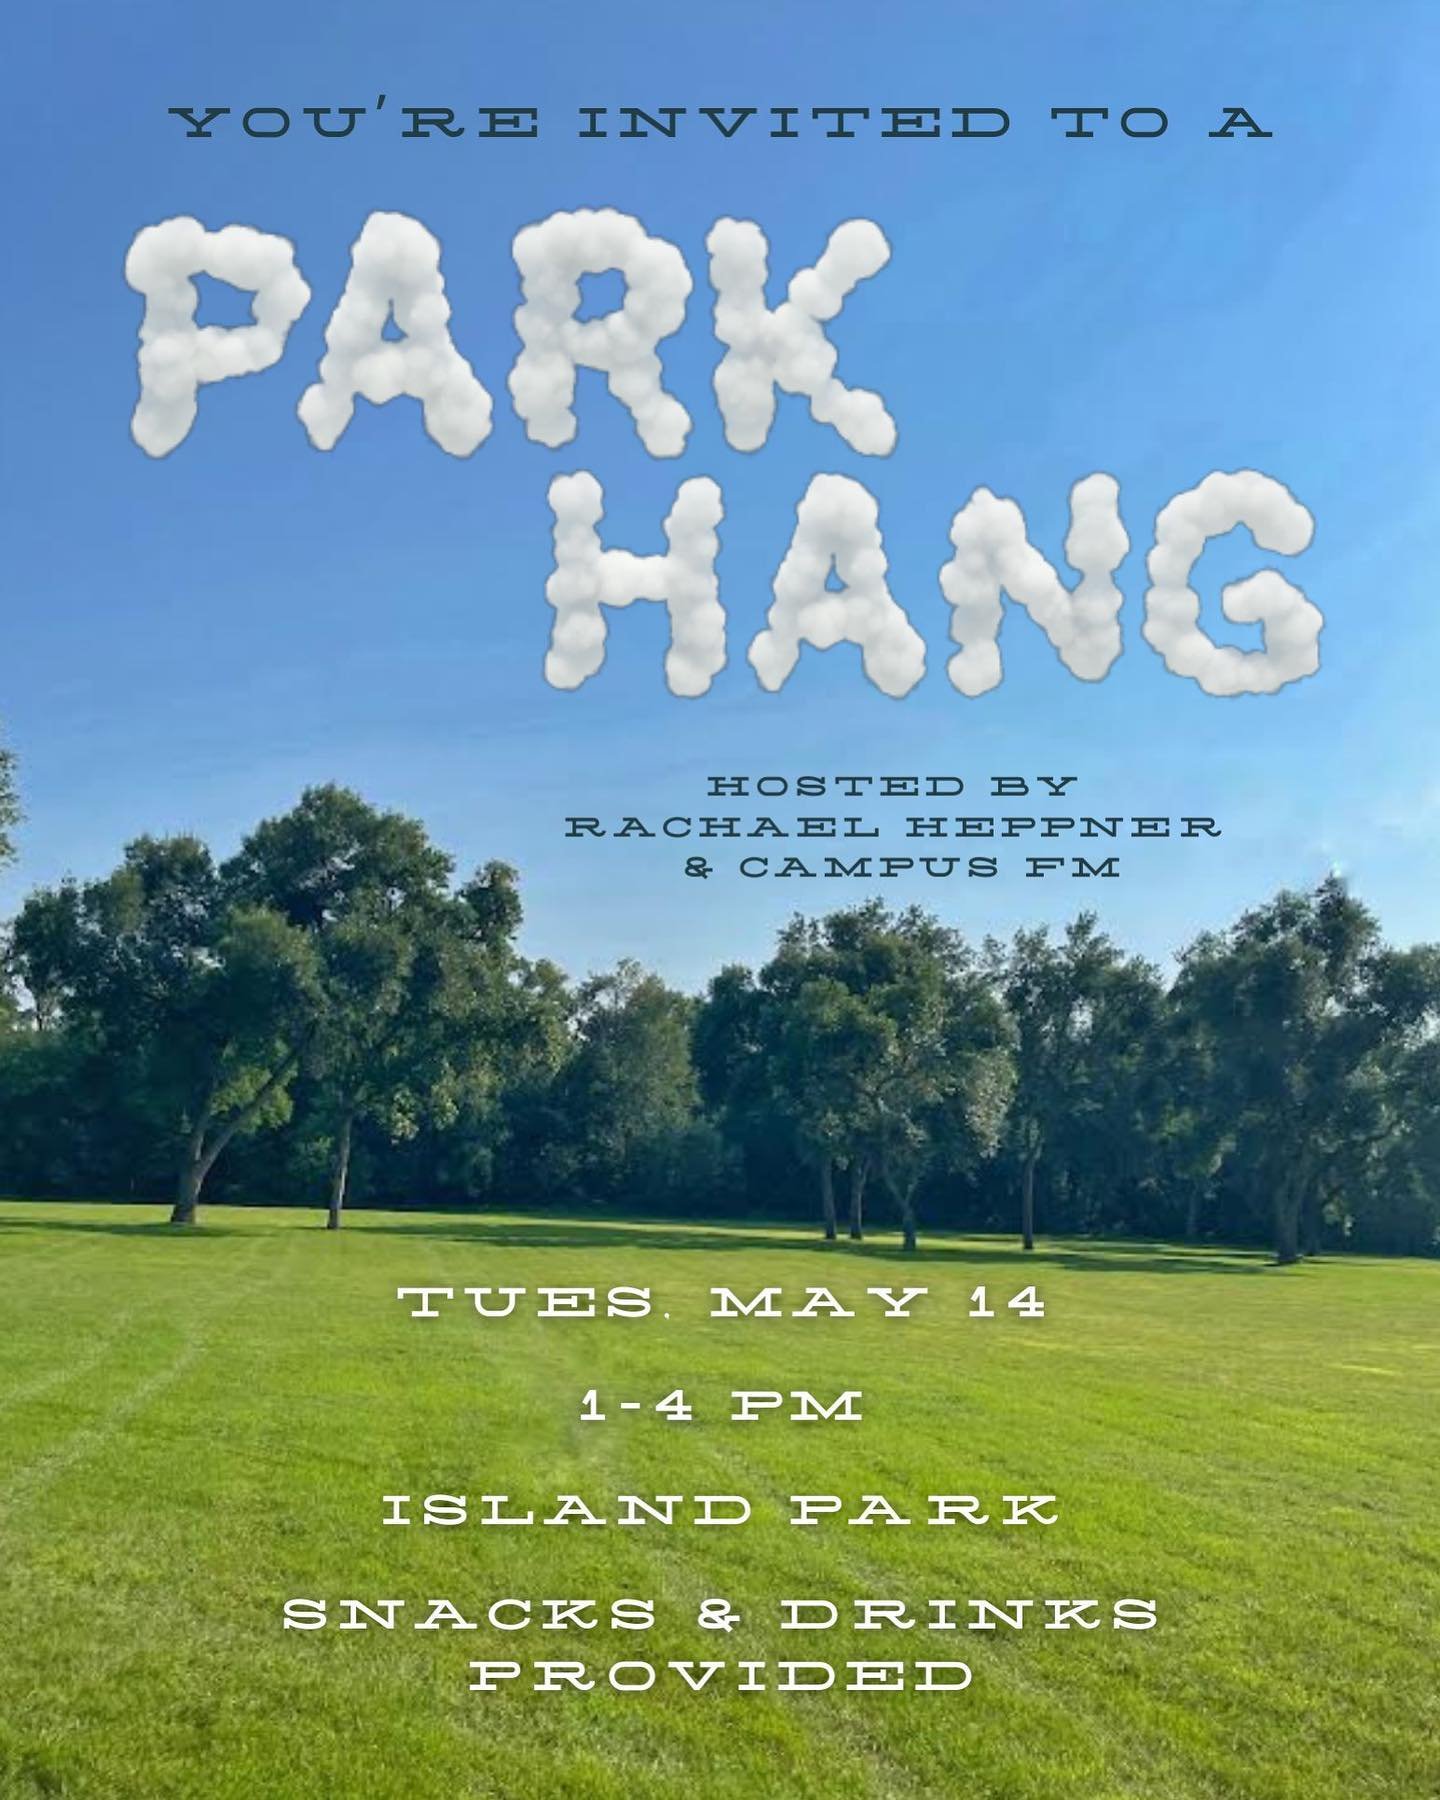 Now that finals are over, it&rsquo;s time to relax! Join us Tuesday, may 14th for an afternoon in the park. Feel free to bring art supplies, games, hammocks, or just yourself :)

See you there!